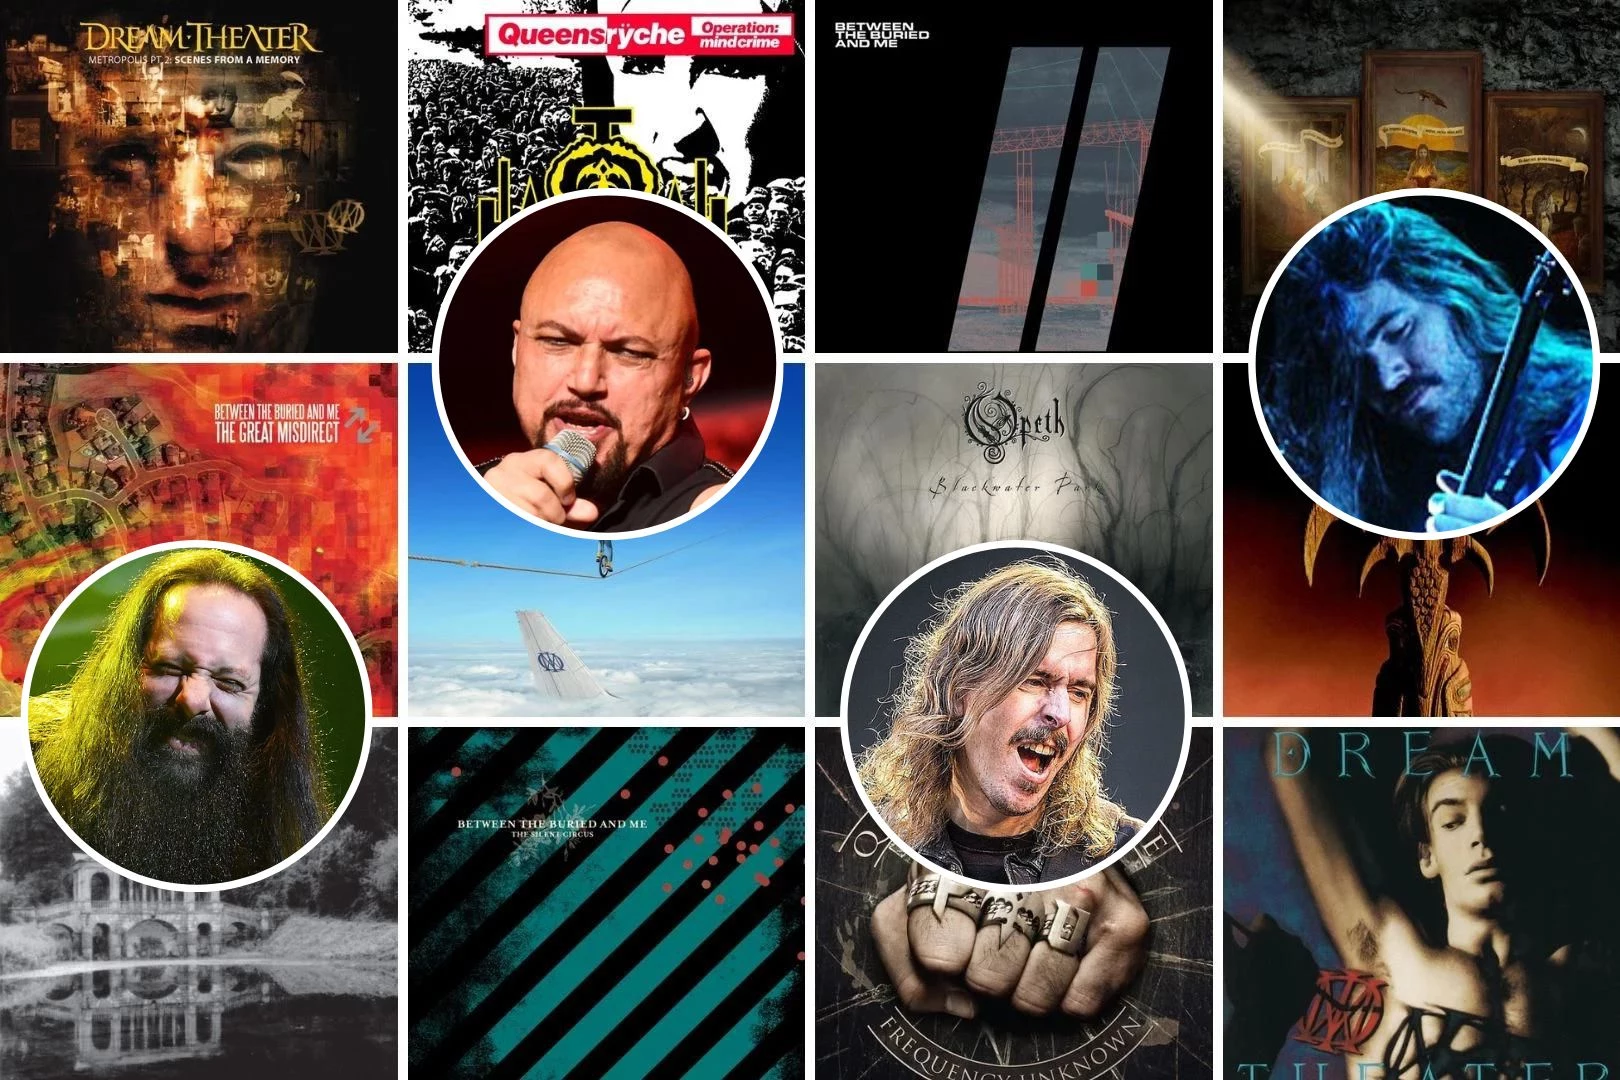 Every 'Big 4' Prog Metal Album Ranked From Worst to Best